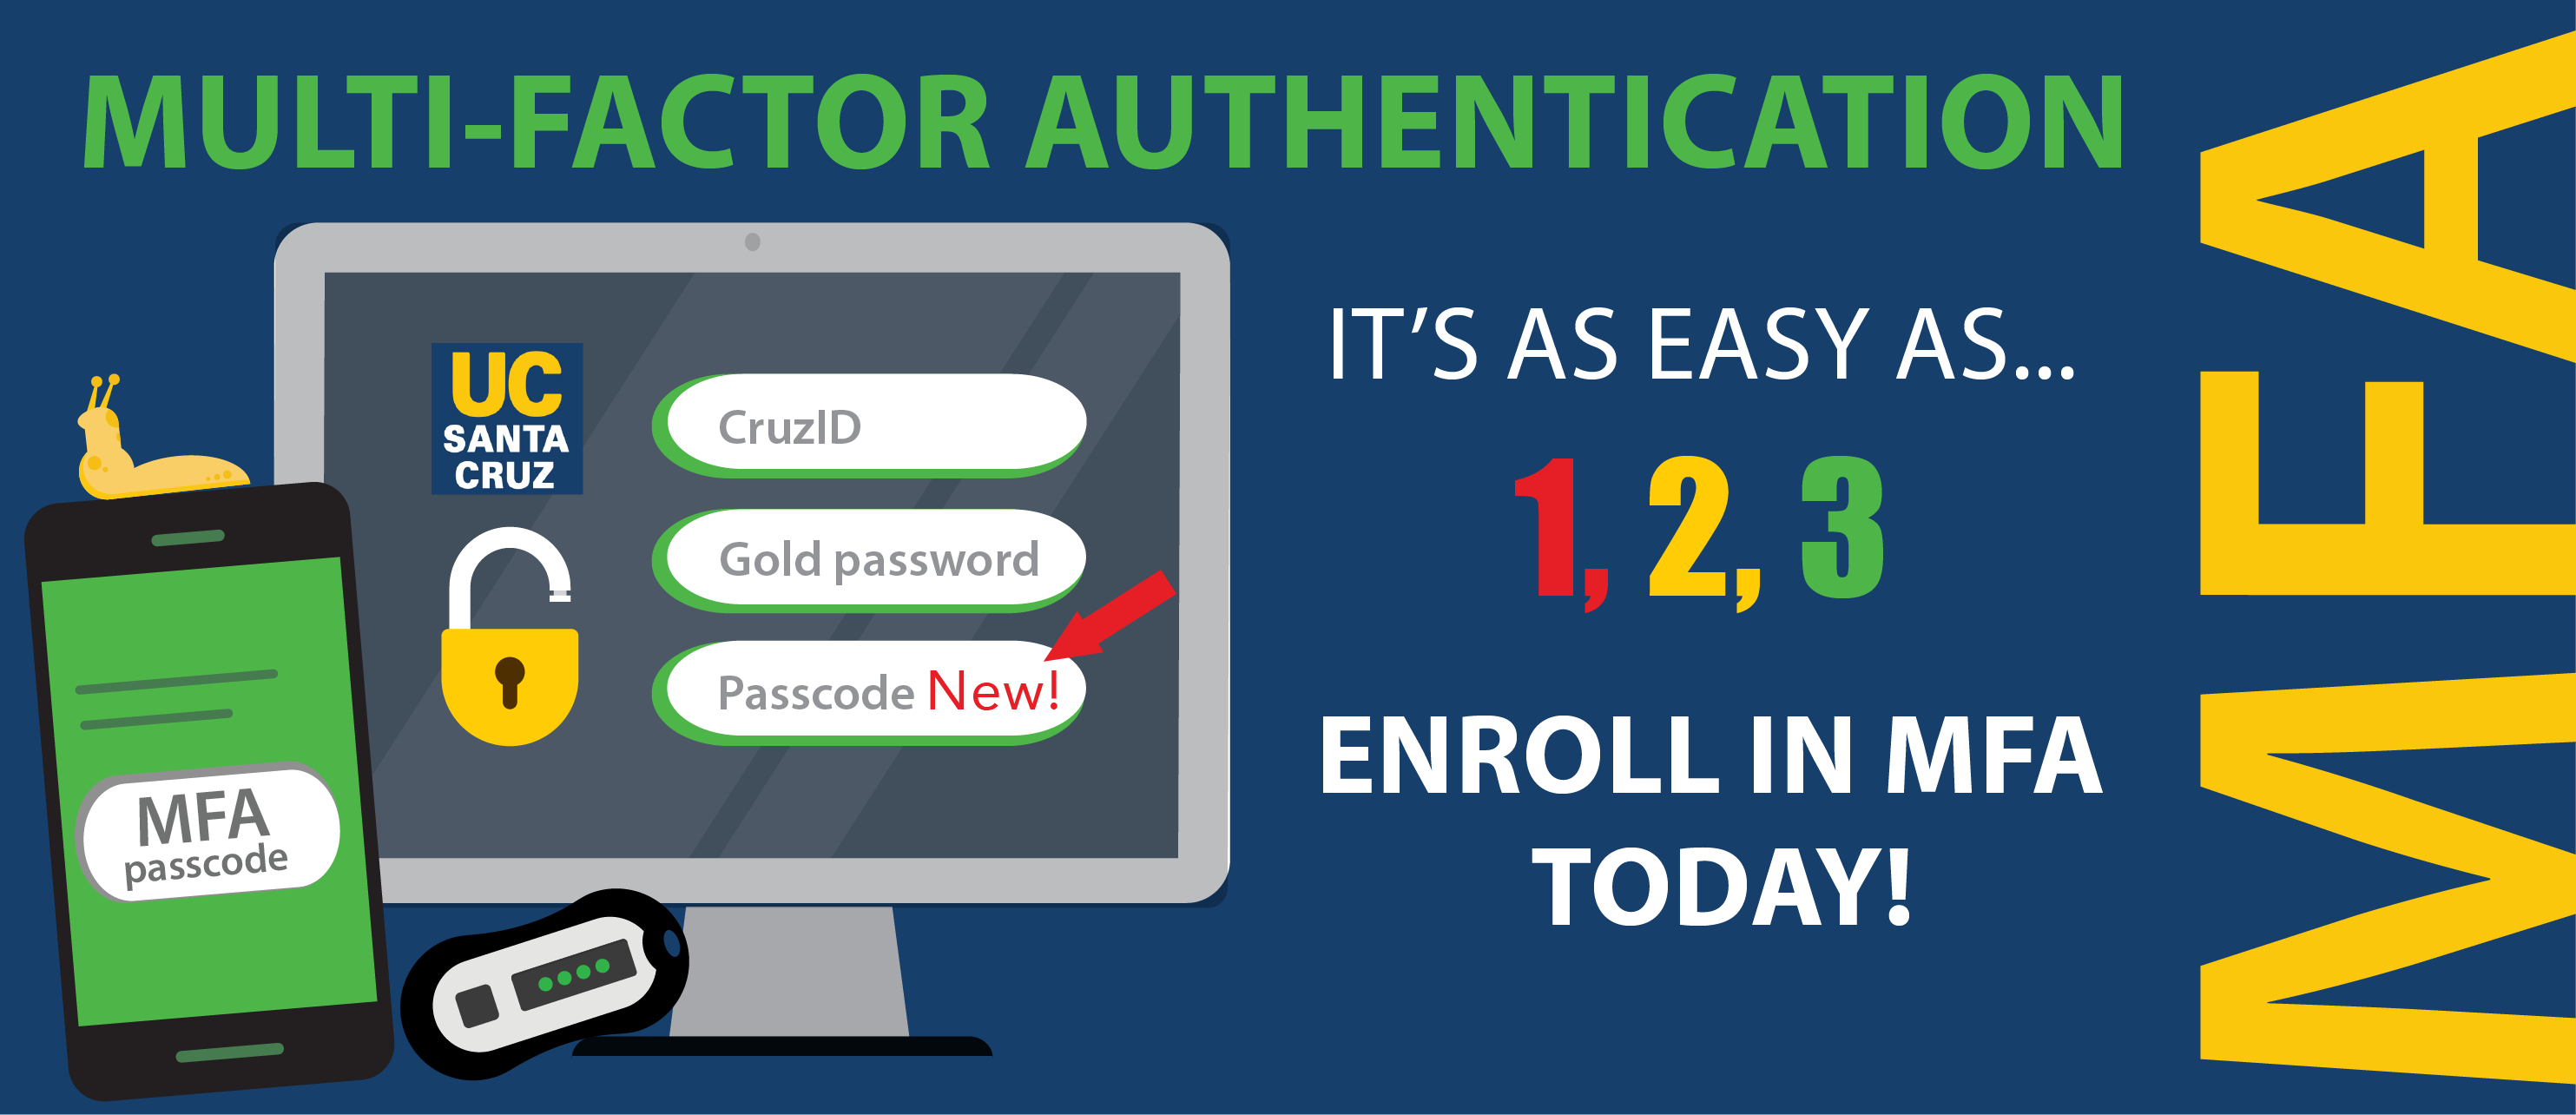 MULTI-FACTOR AUTHENTICATION  MFA will be required for students, faculty, and staff in 2019!